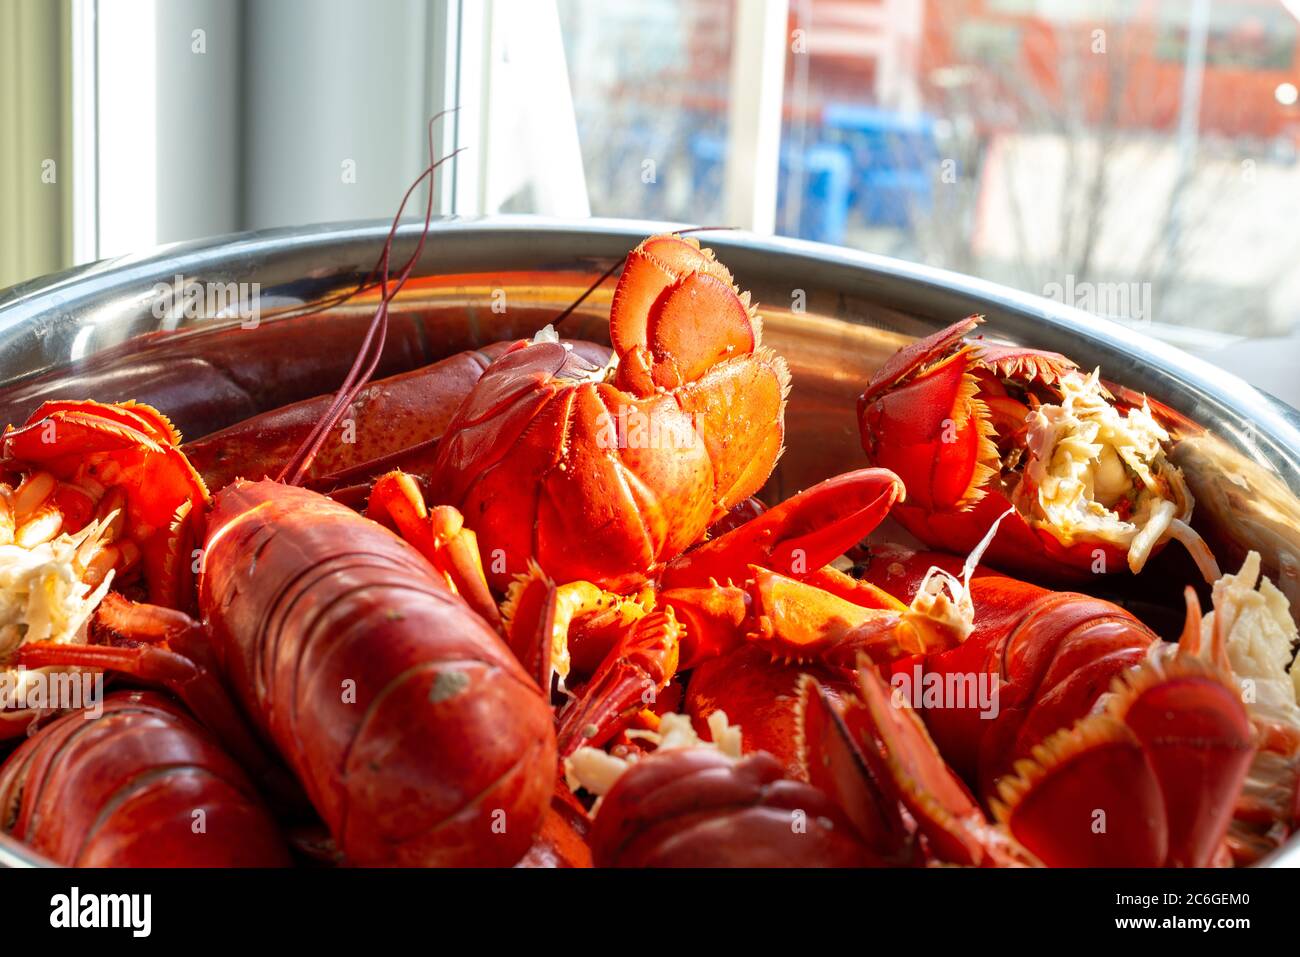 A large bowl of cooked lobster sits on a table in a restaurant near a brightly lit window. Stock Photo